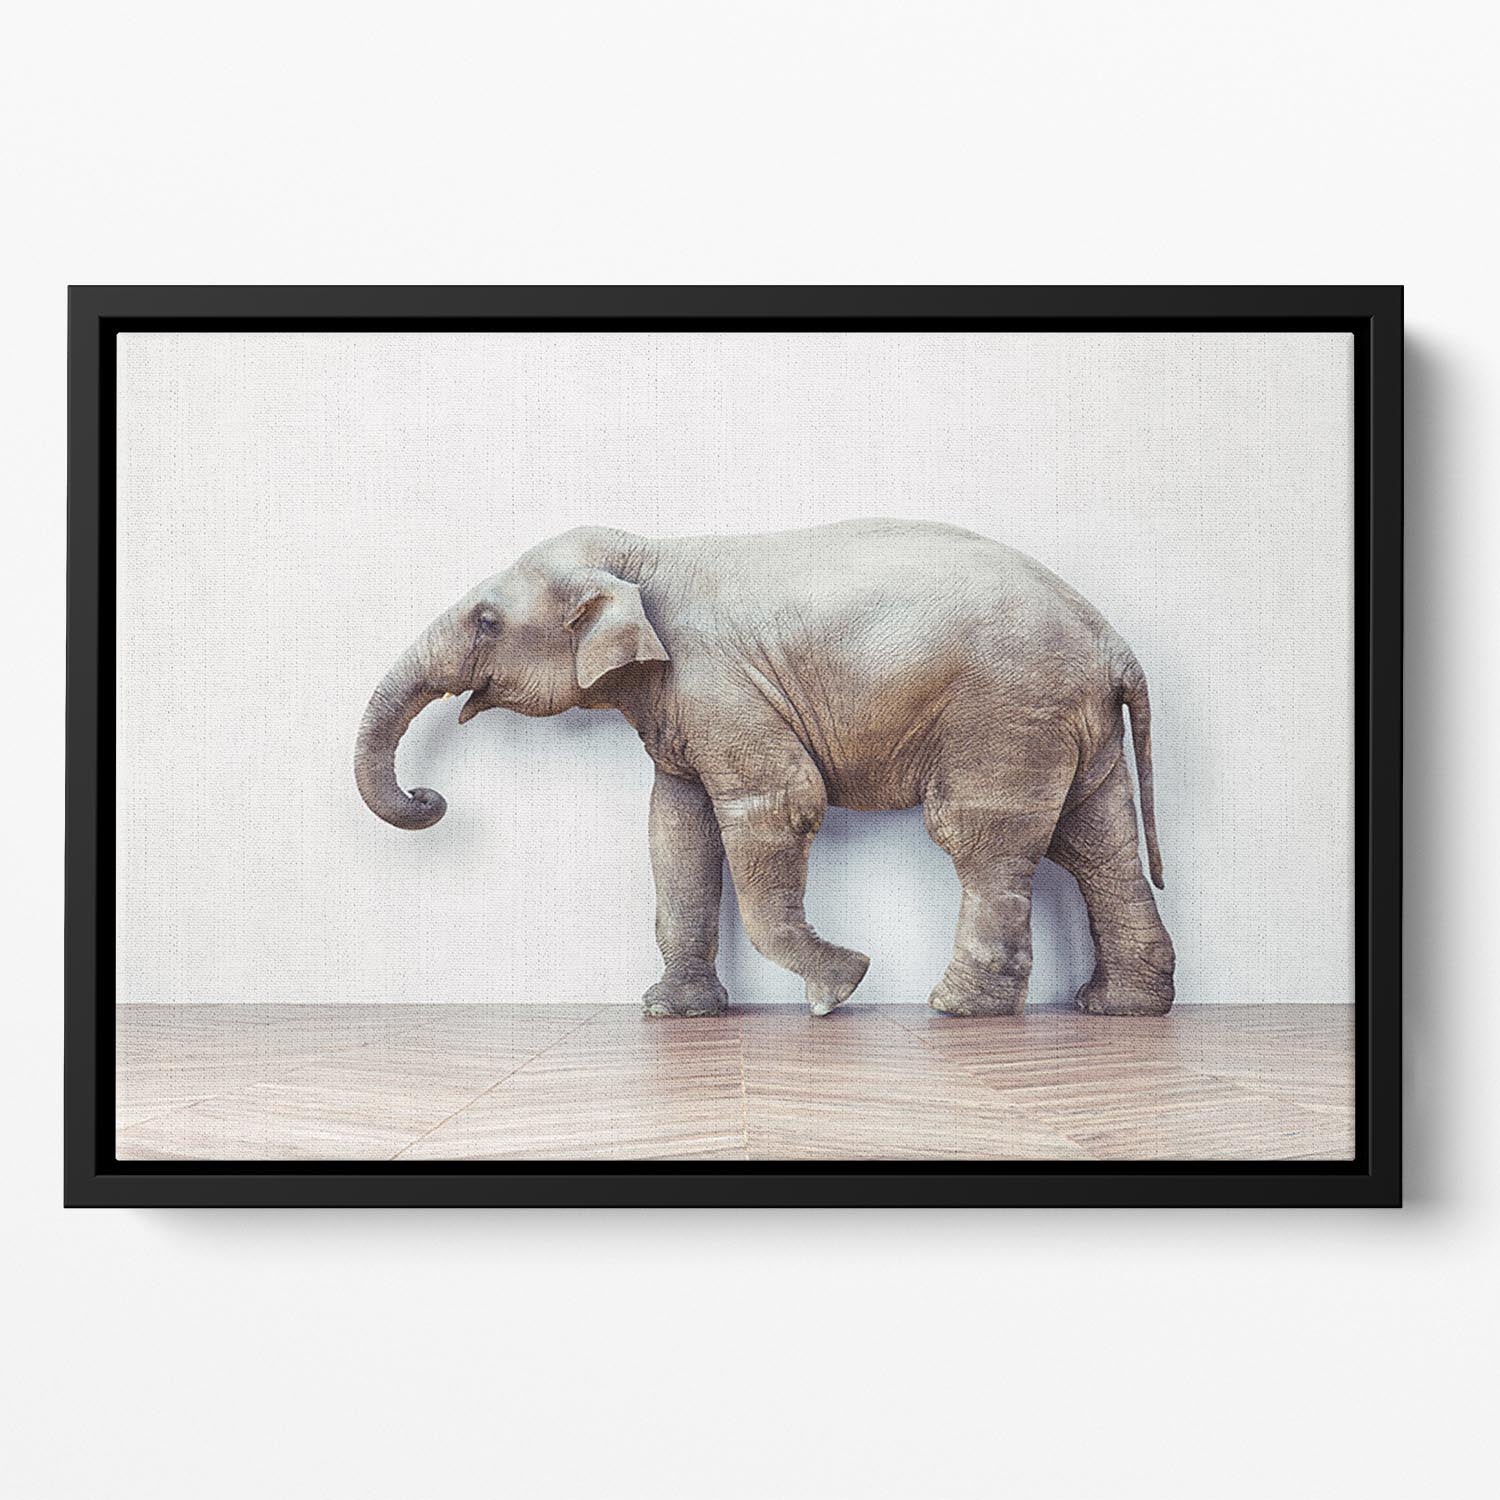 The elephant calm in the room near white wall Floating Framed Canvas - Canvas Art Rocks - 2